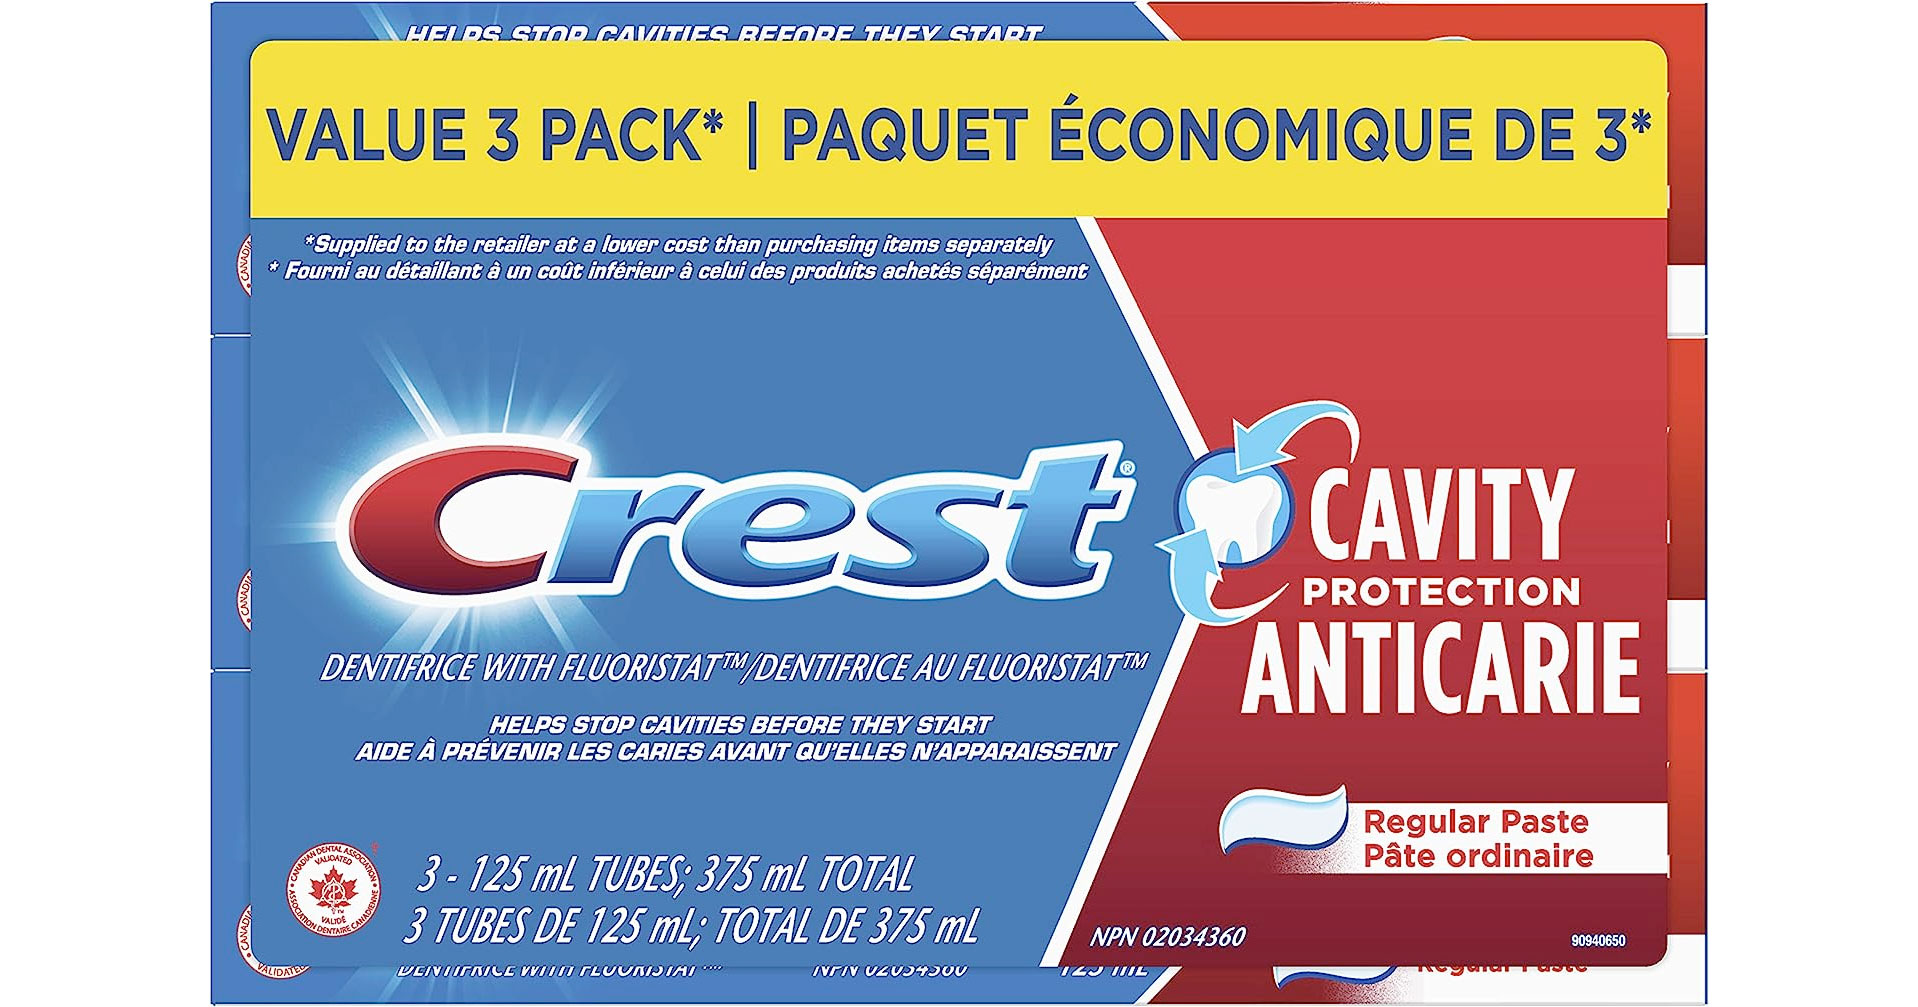 Amazon：Crest Cavity Protection Toothpaste (3 Pack)只賣$3.87